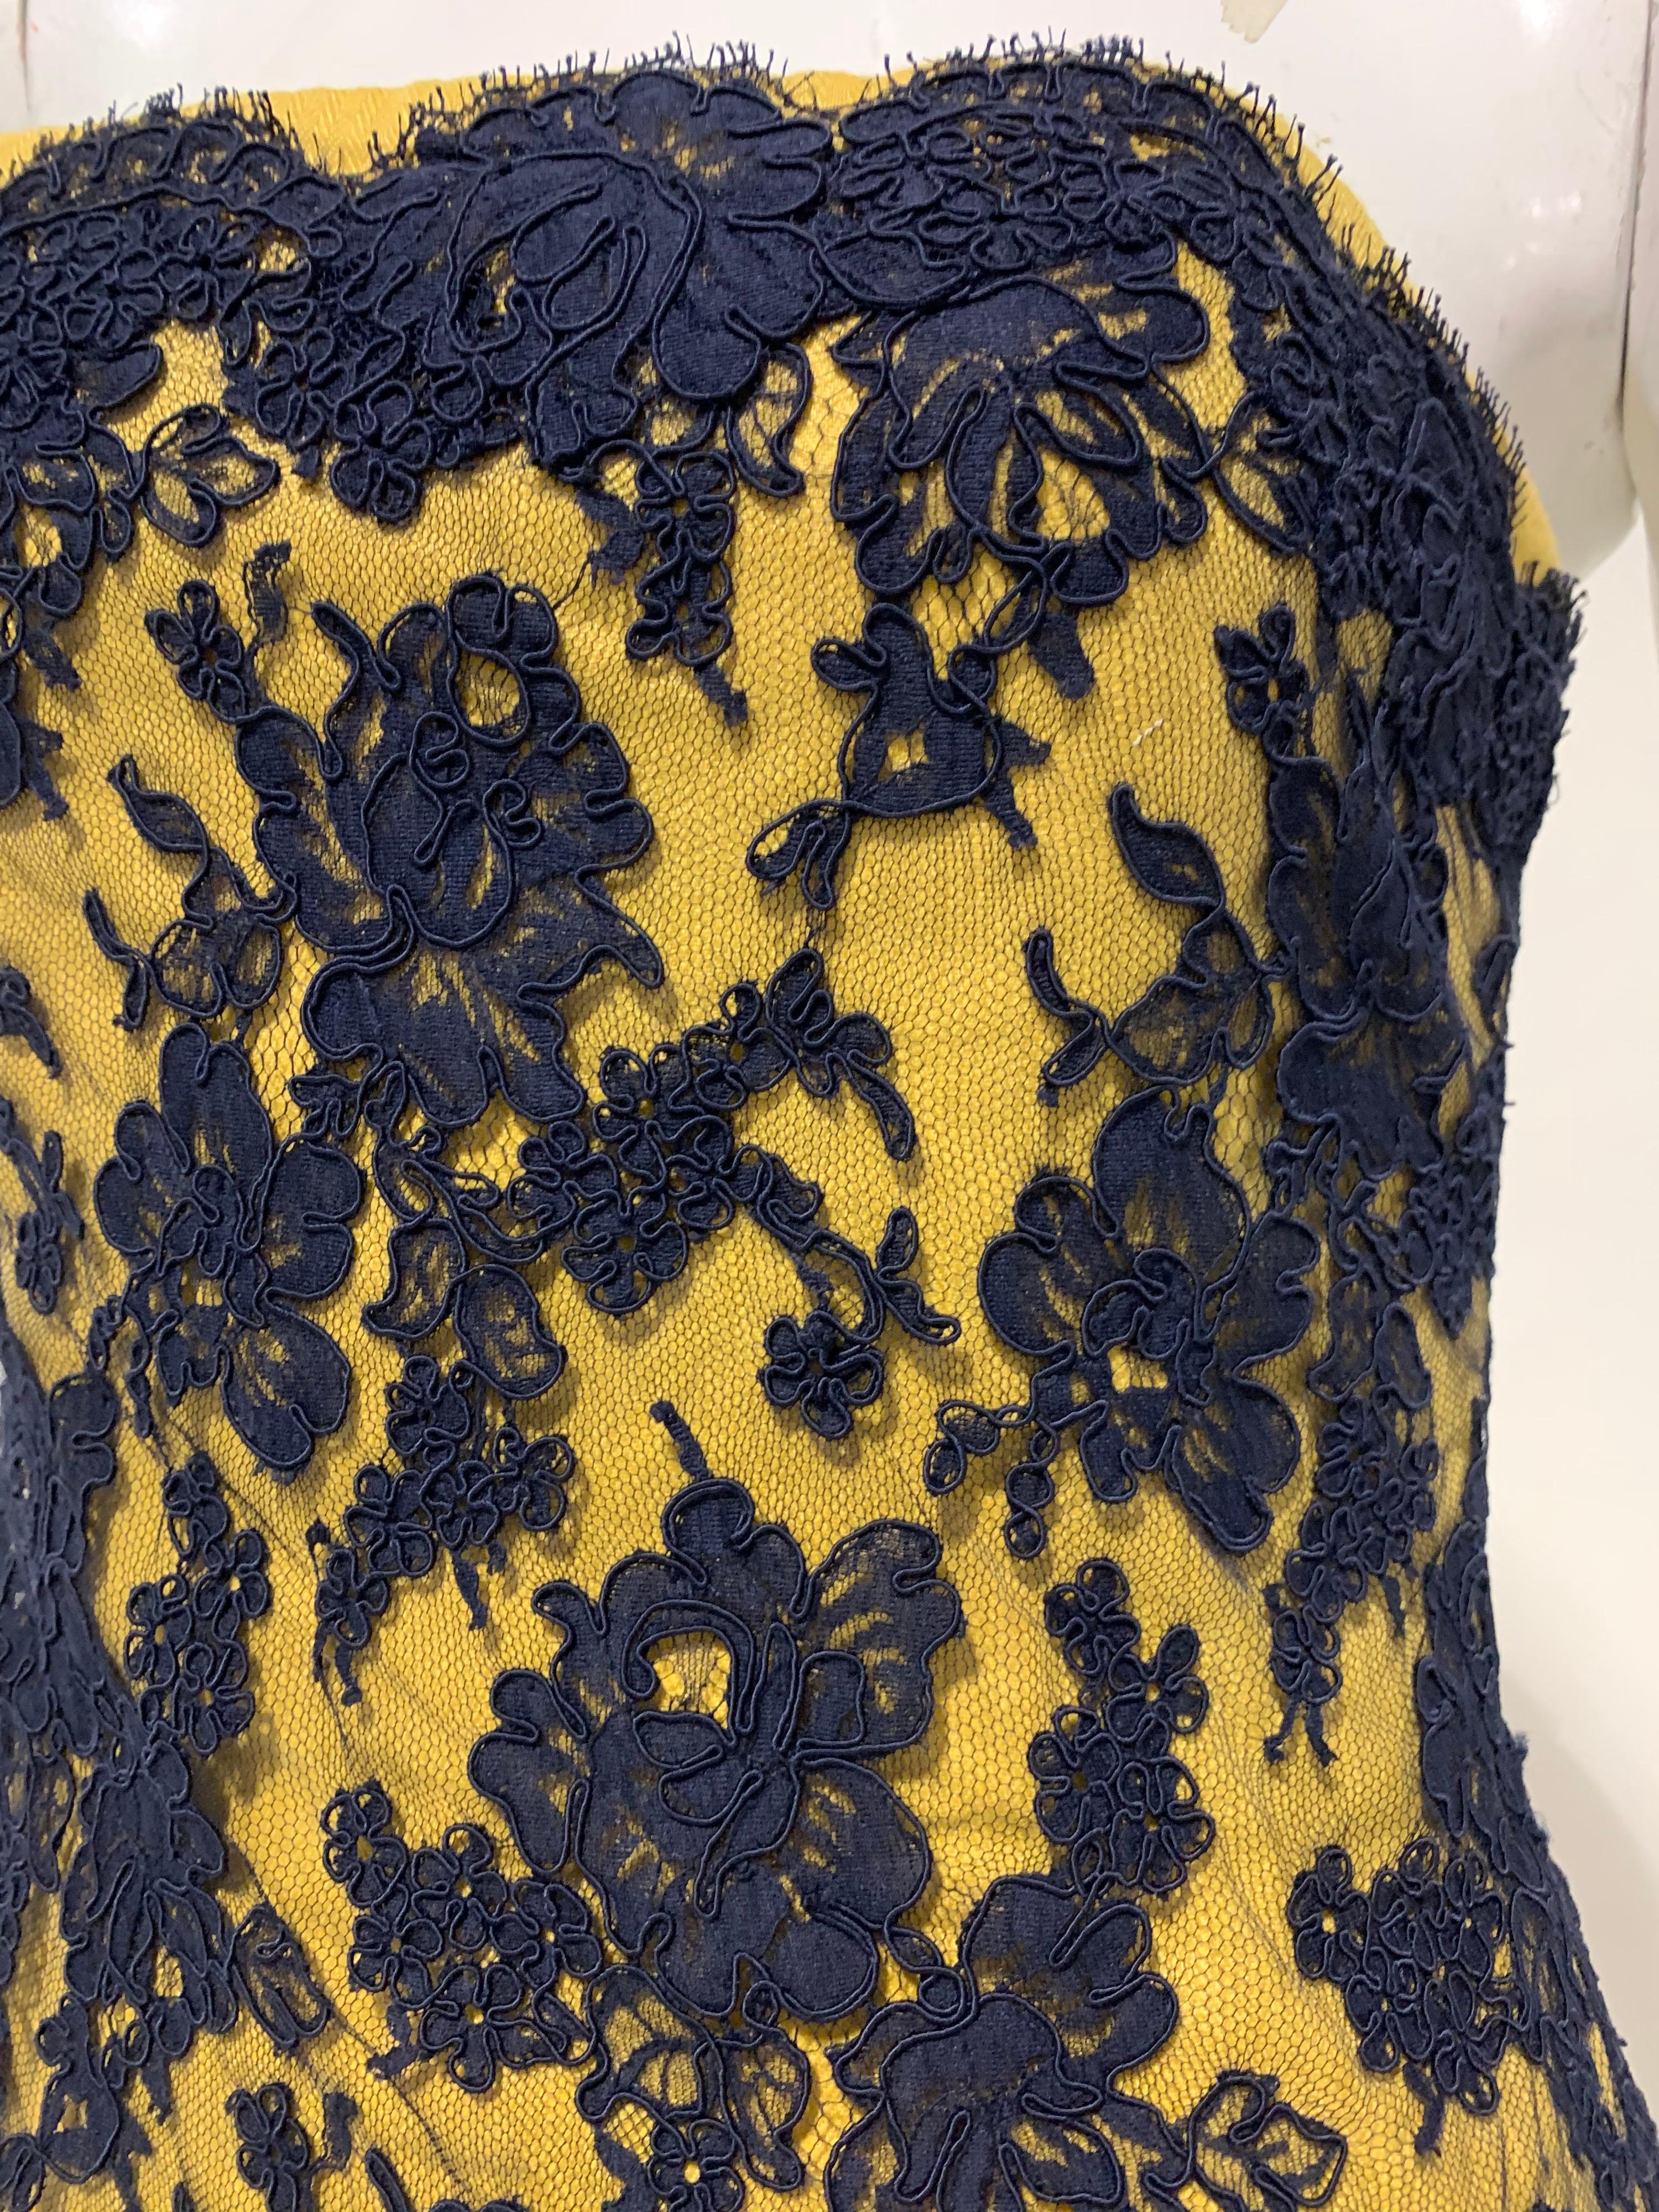 1990s Bill Blass butter yellow cotton twill strapless cocktail dress with gorgeous French navy blue lace overlay:  Bodice is quite structured for superb shaping and security, having an interior zipper at back as well as the outside back zipper. This